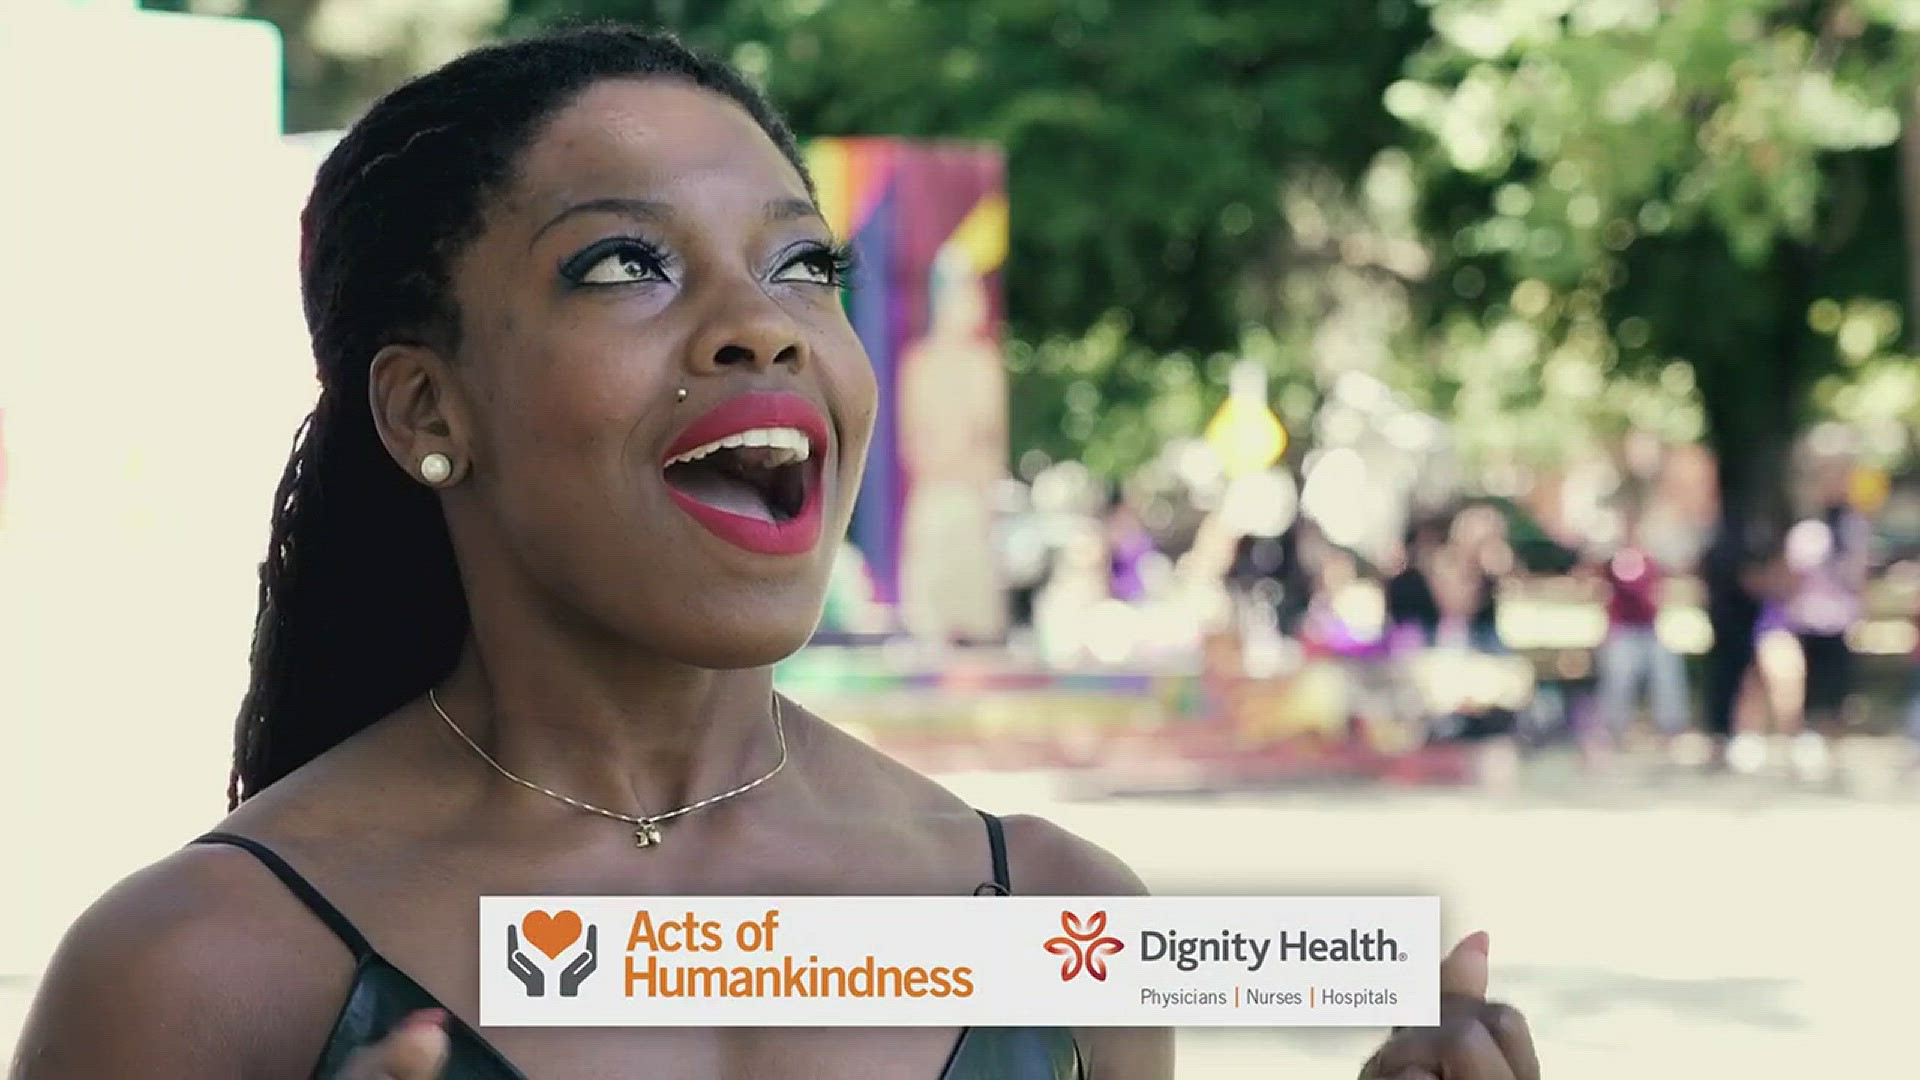 Acts of Humankindness is sponsored by Dignity Health. #HelloHumankindness